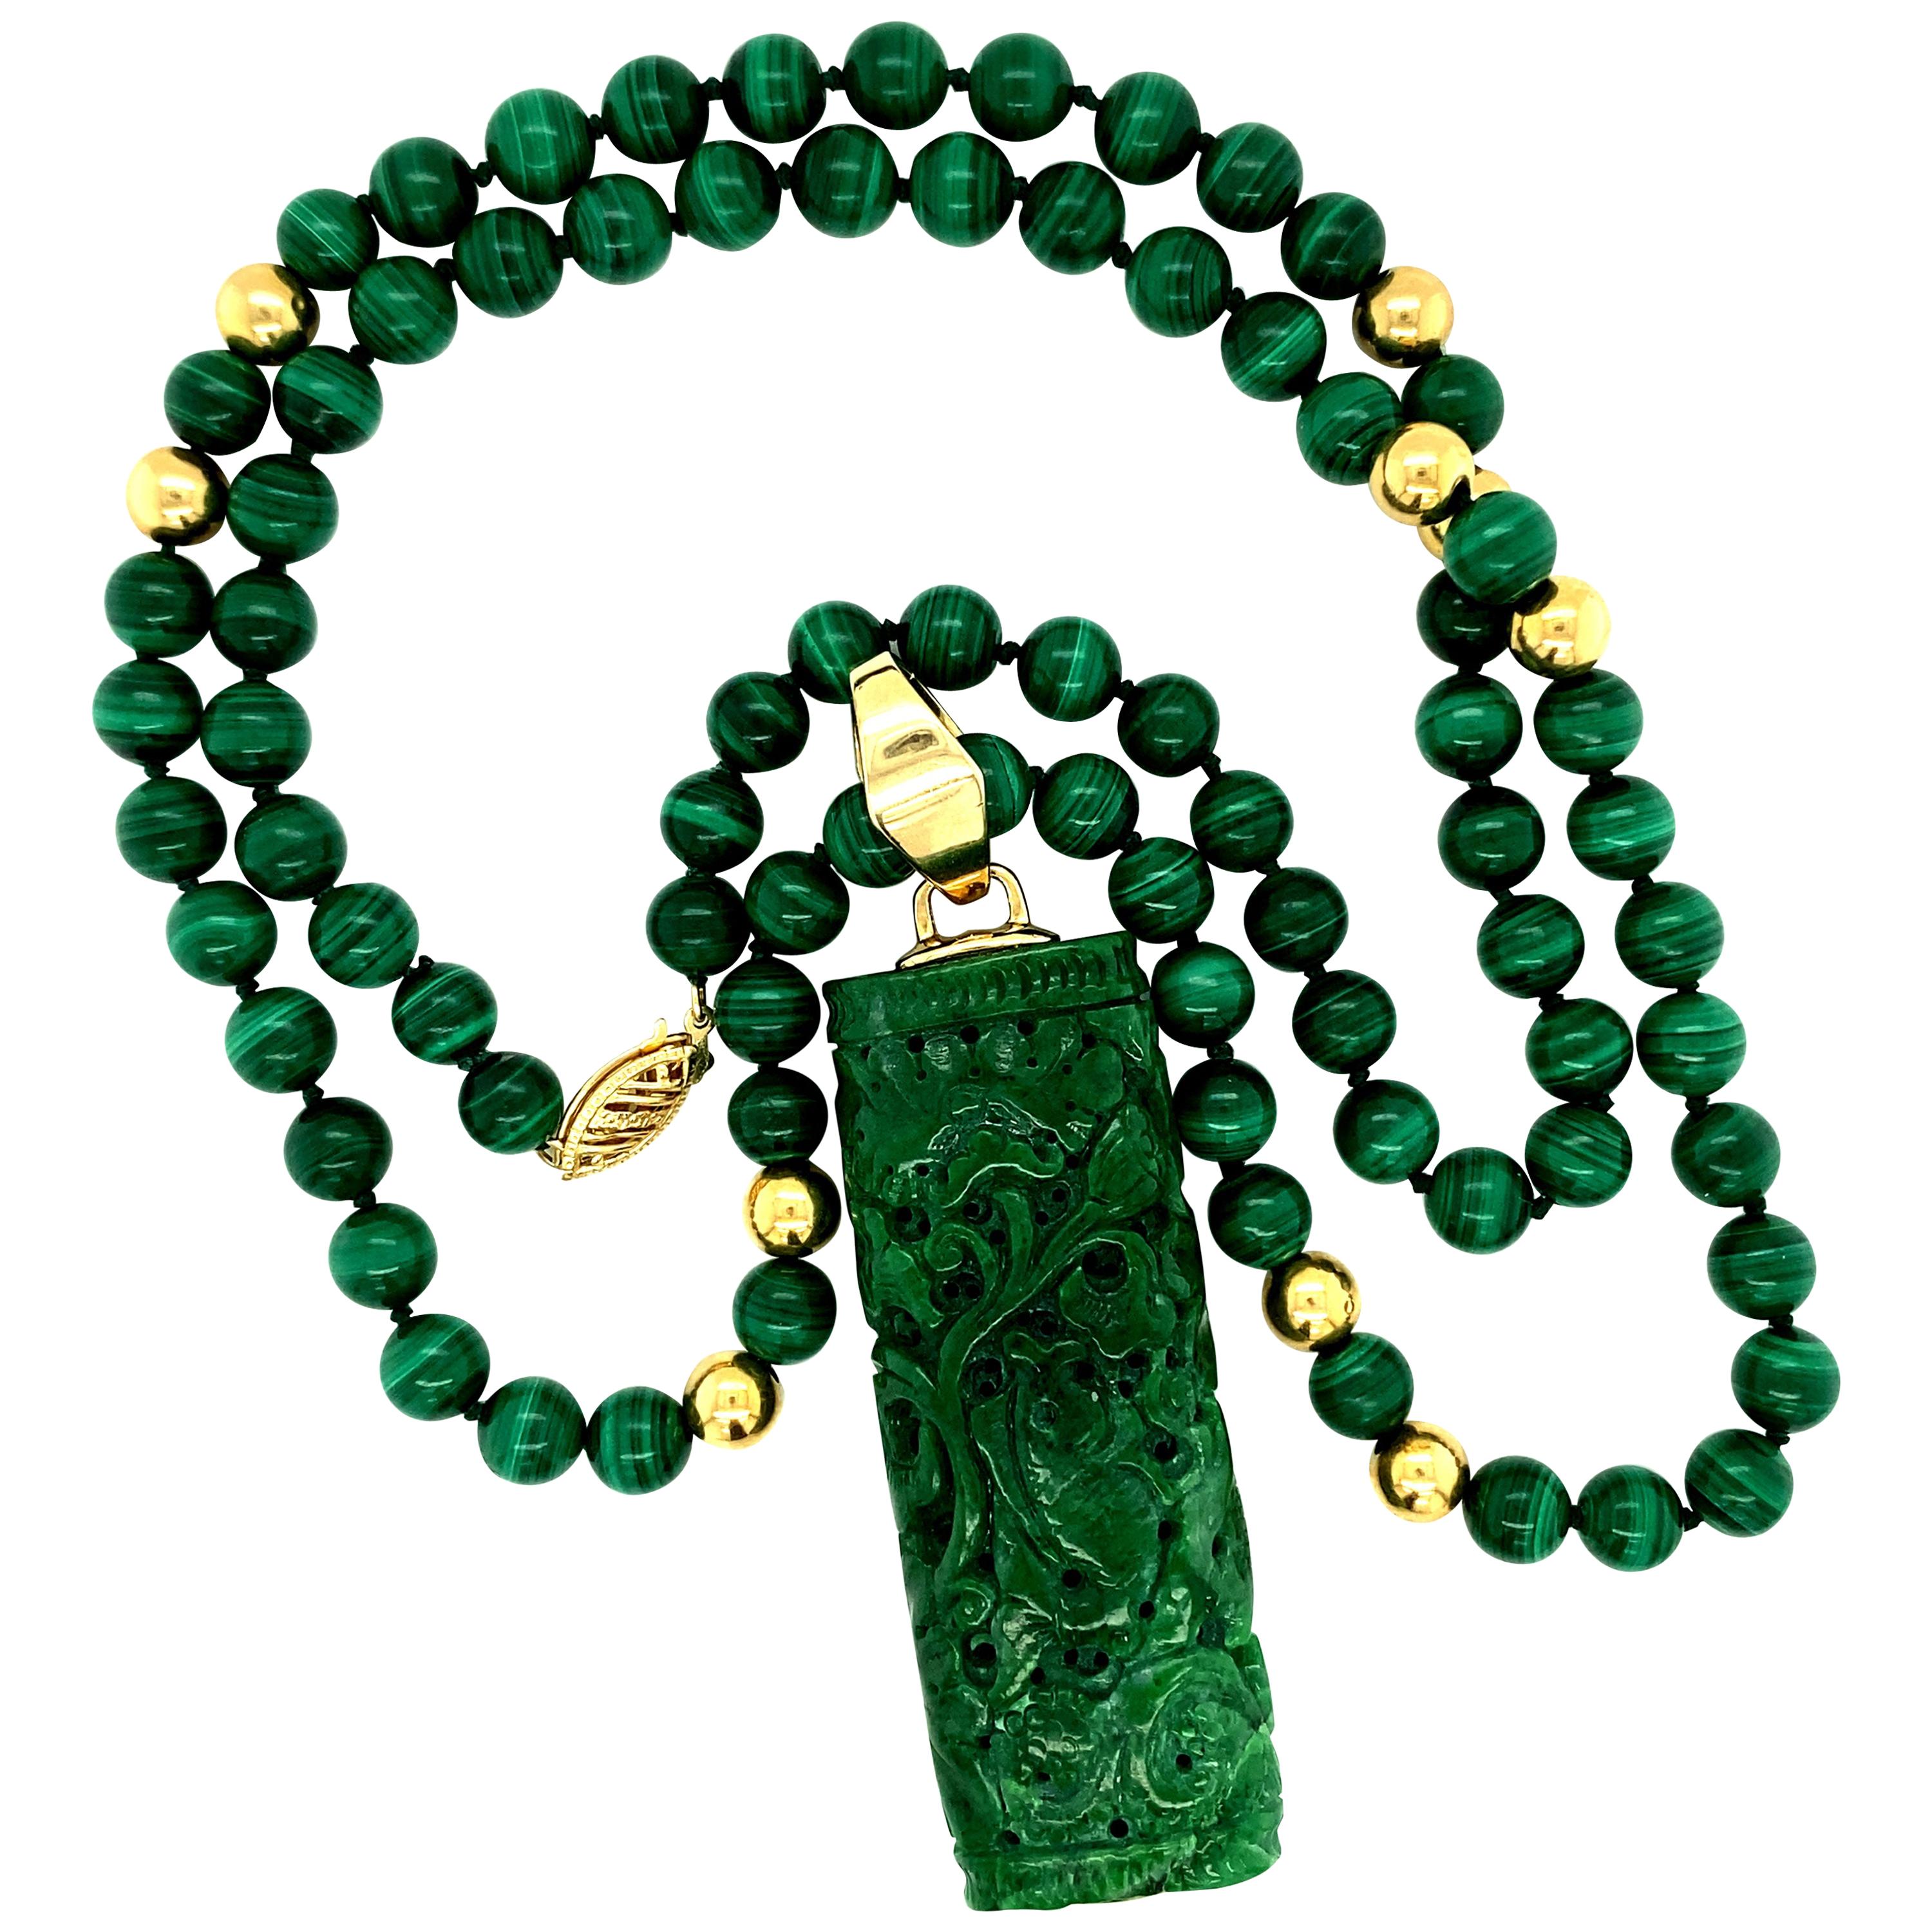 Vintage Carved Jade on a Malachite Bead Necklace, 14kt Yellow Gold